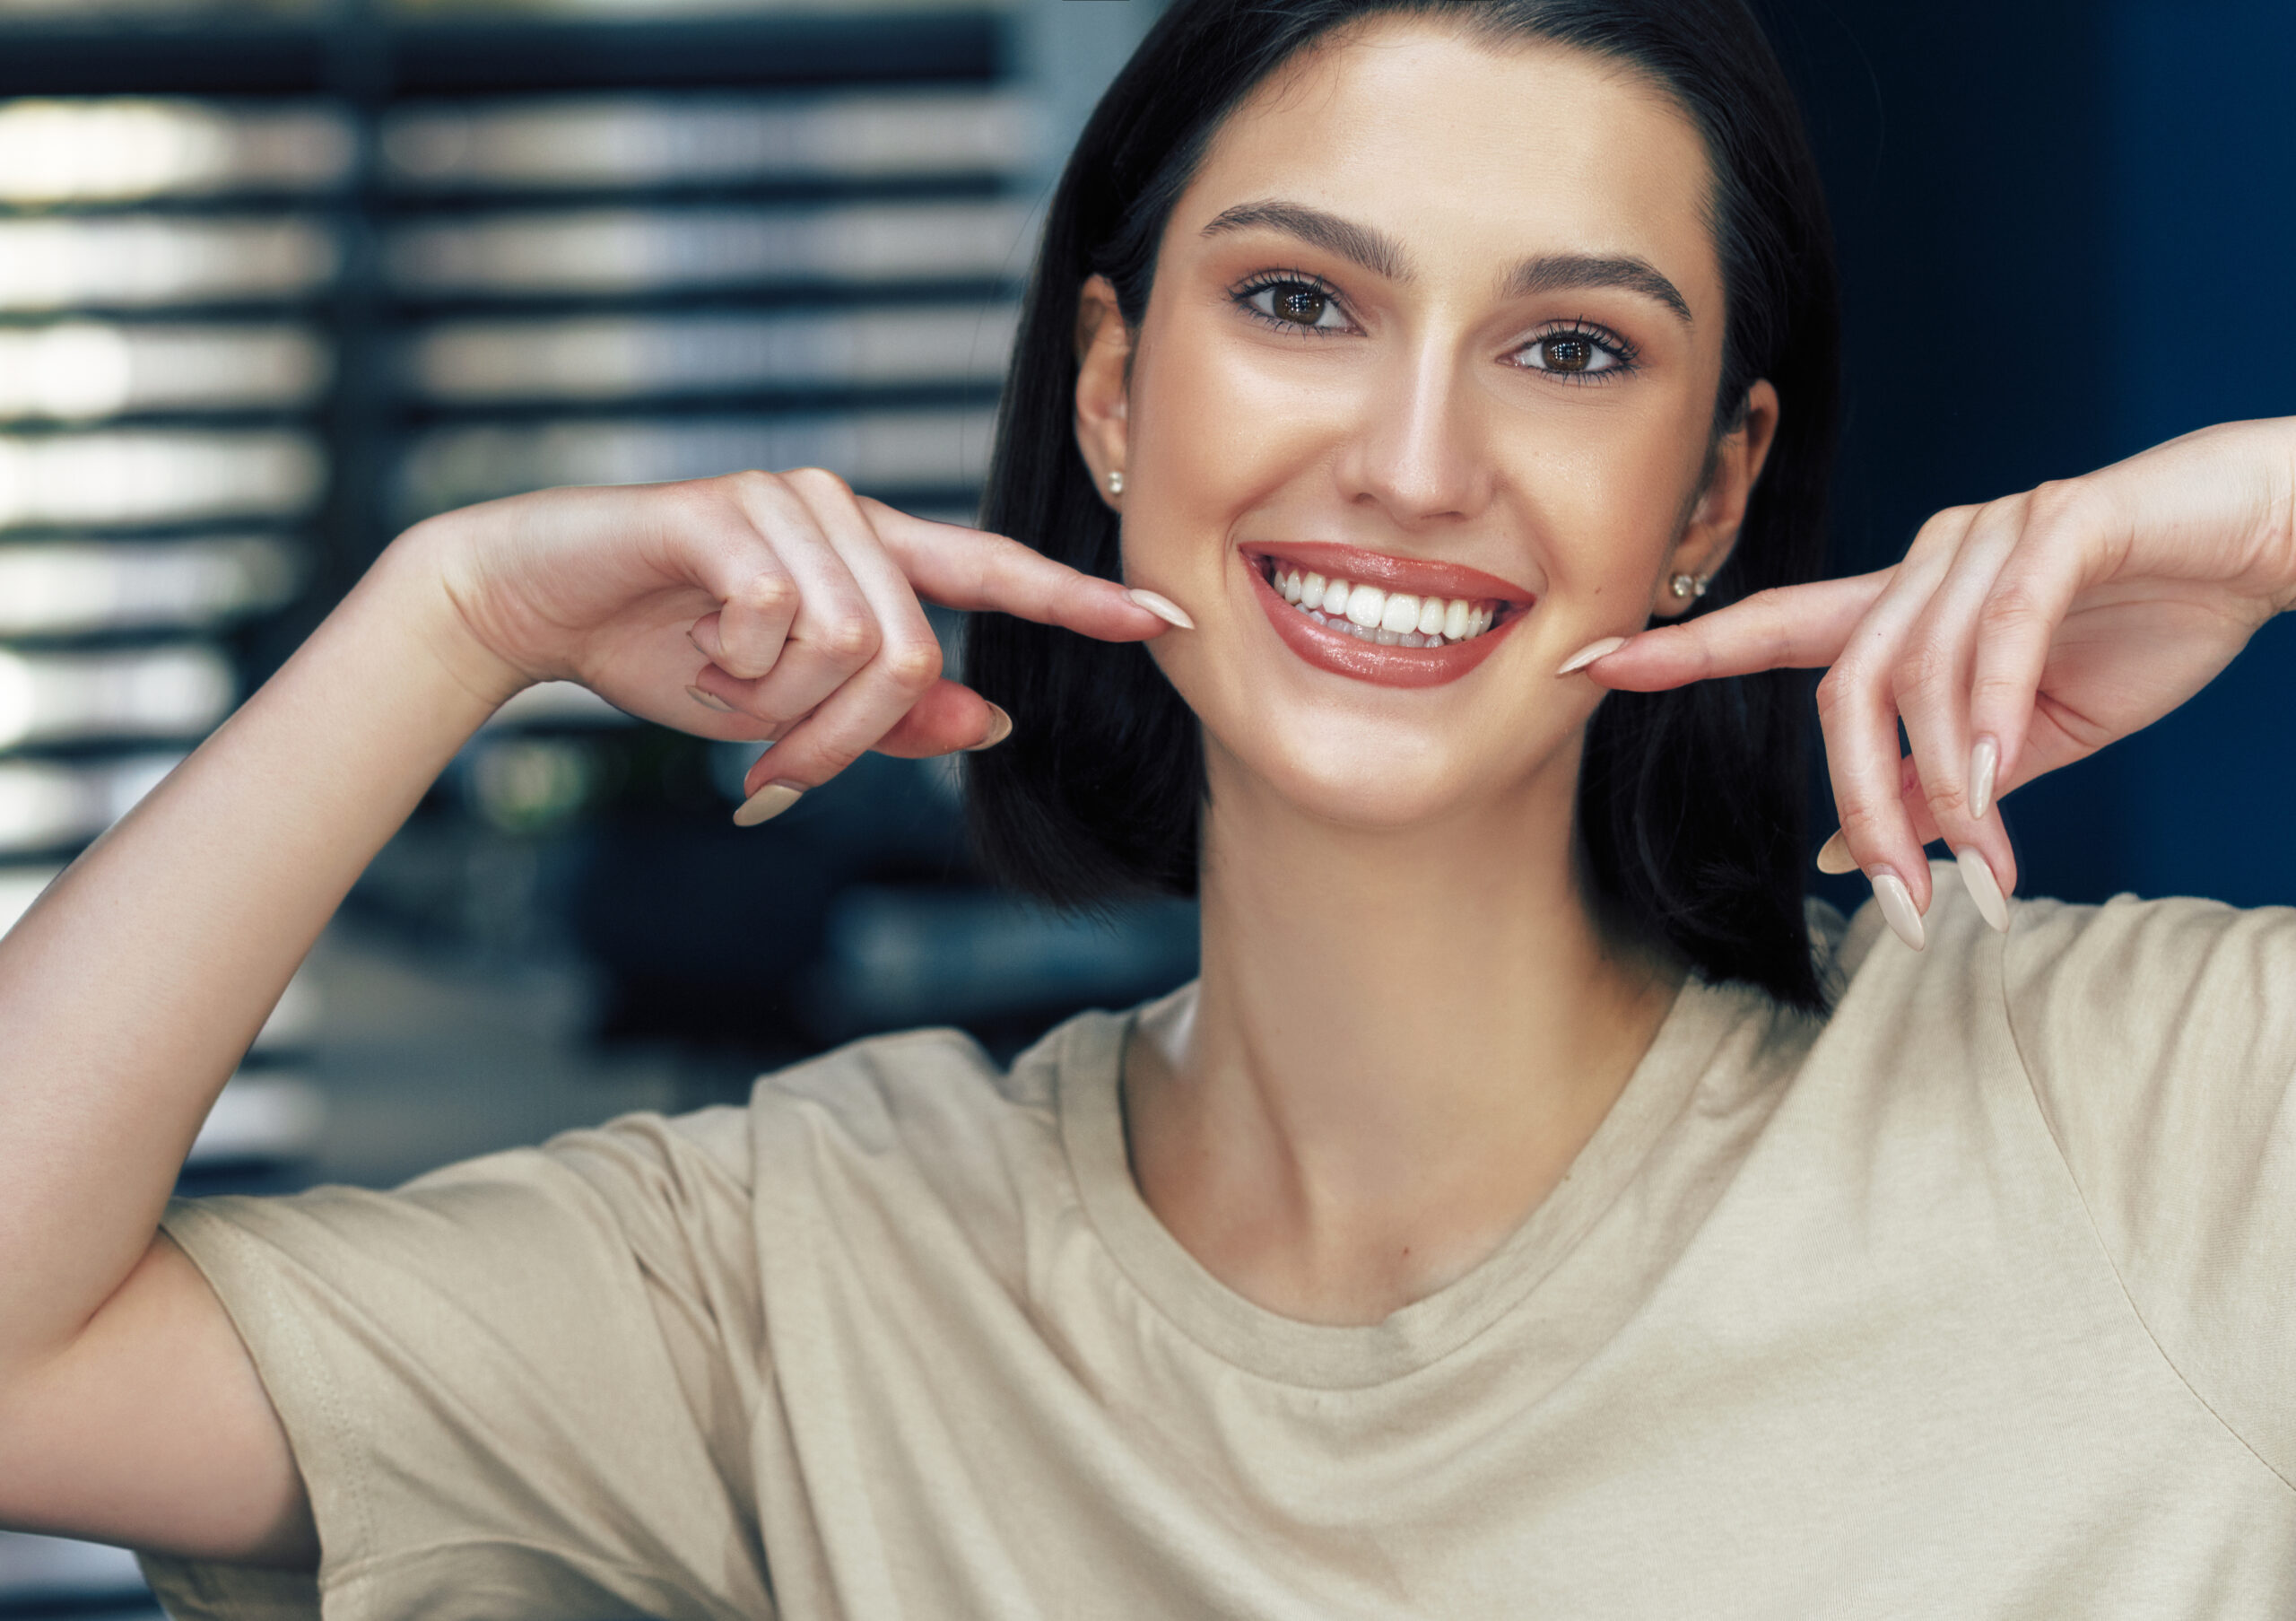 Woman smiling after visiting the dentist office. Dental credit concept image.